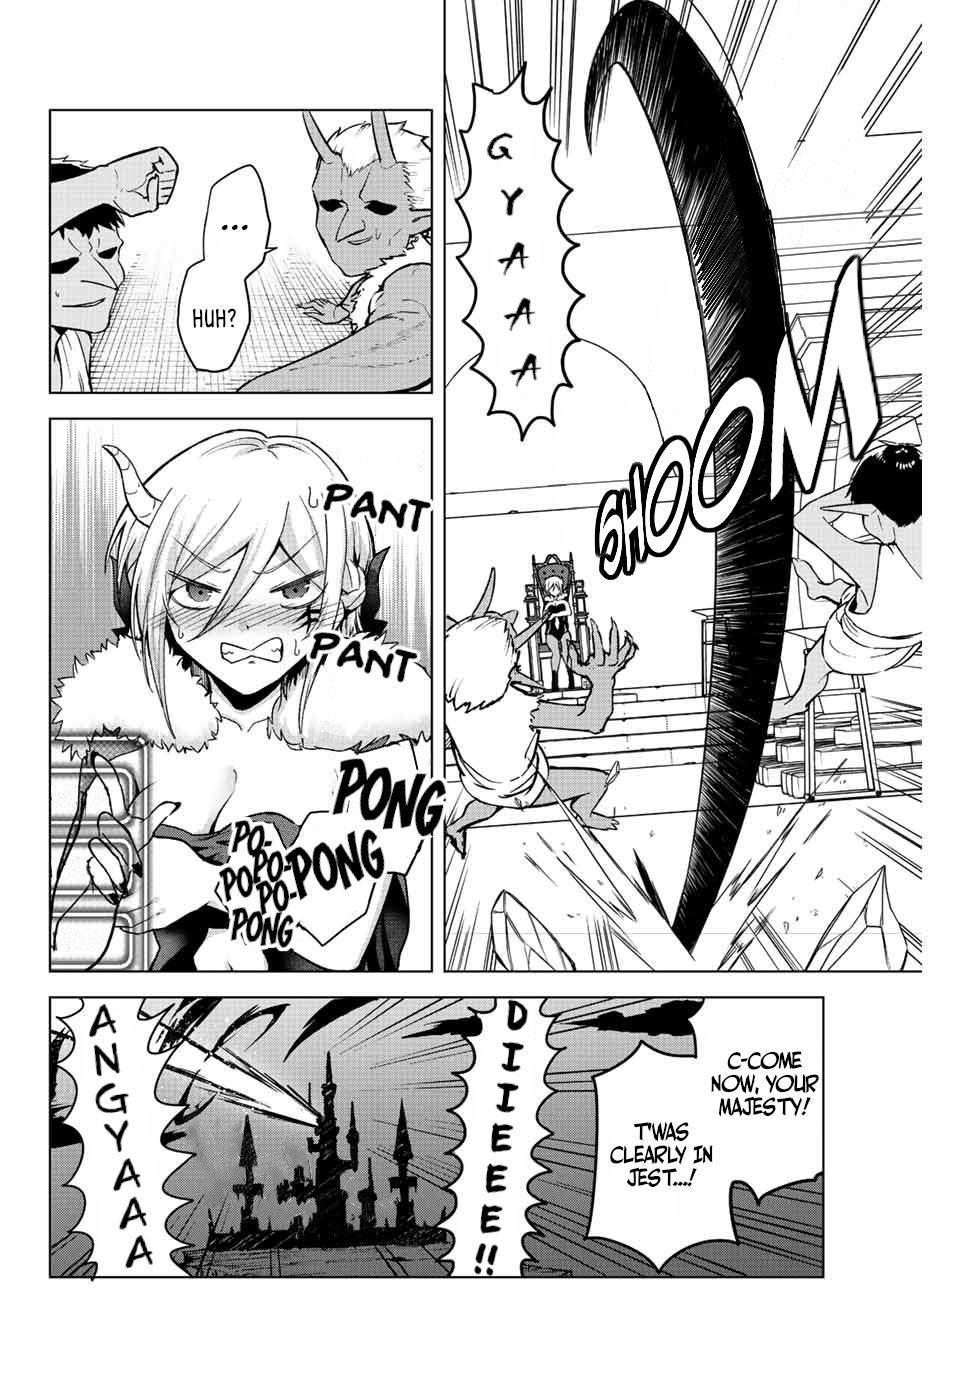 The Death Game Is All That Saotome-San Has Left - Page 2